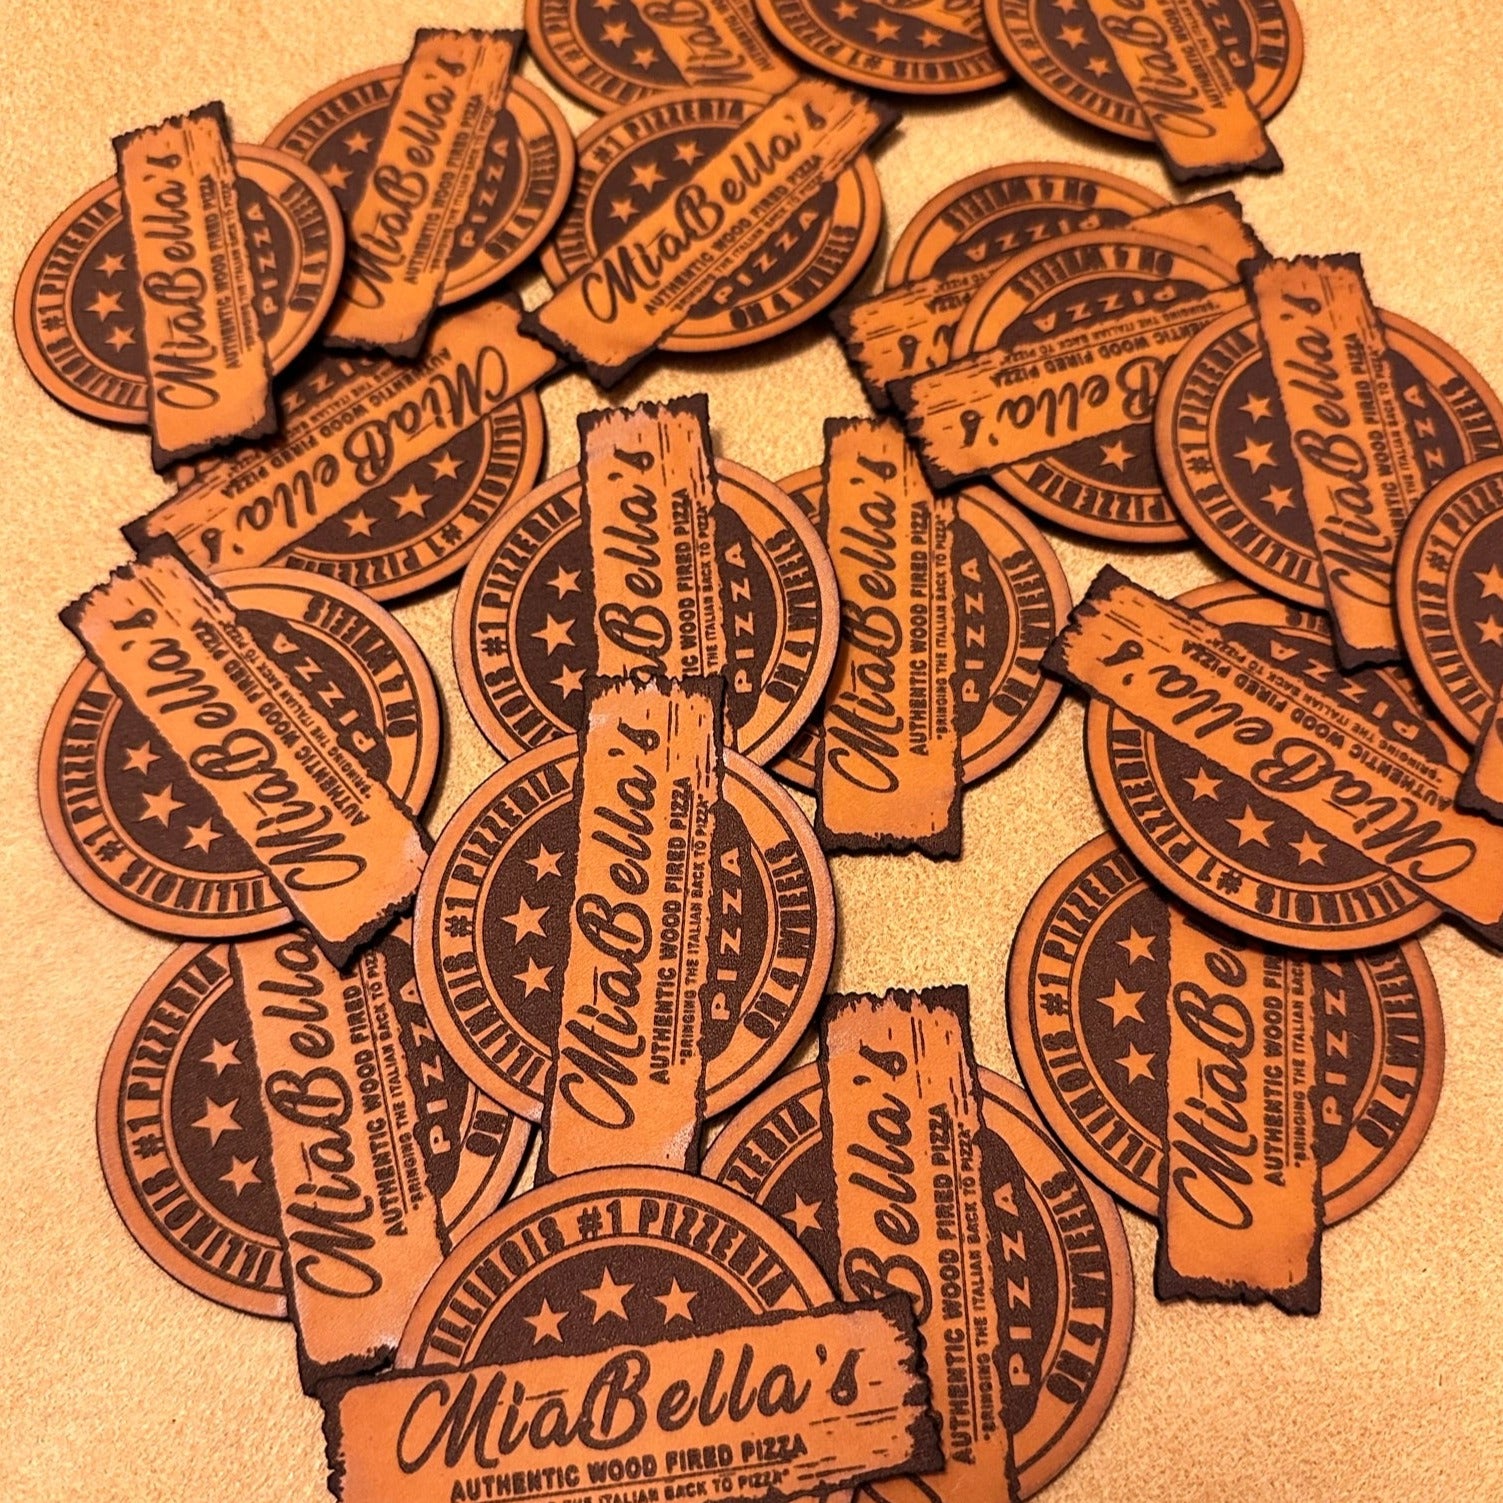 Design Your Own Custom Leather Patches Online